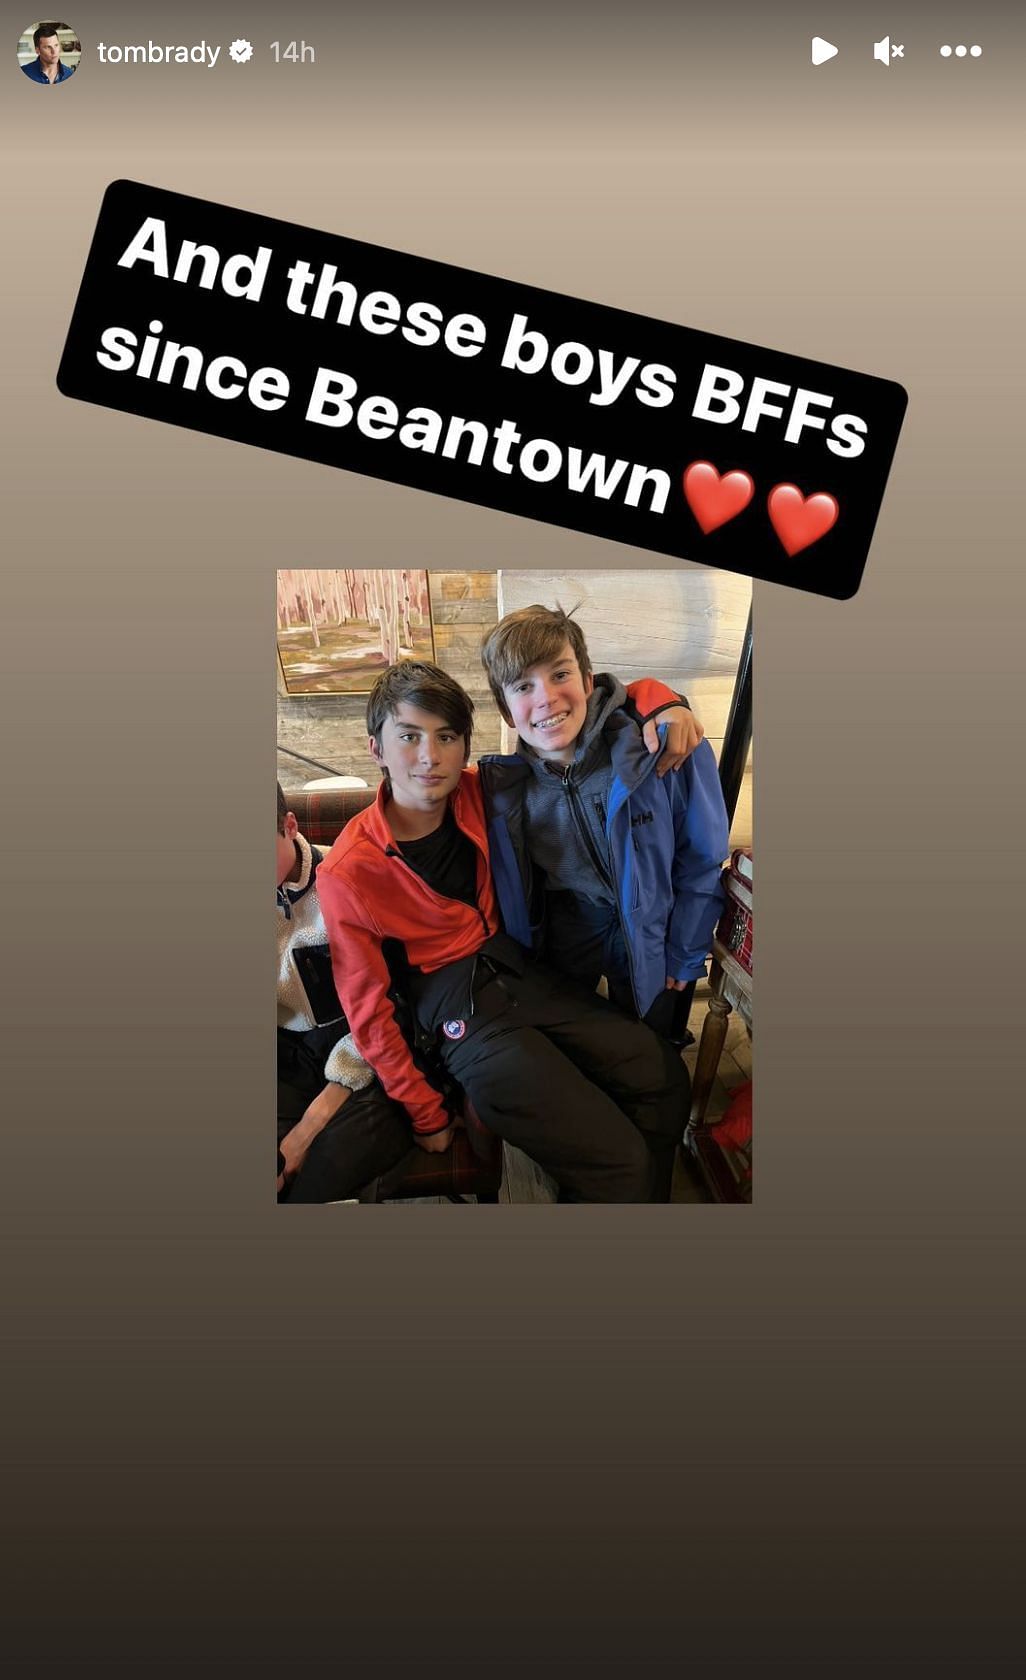 Benjamin hanging out with a friend. Source: Brady (IG)